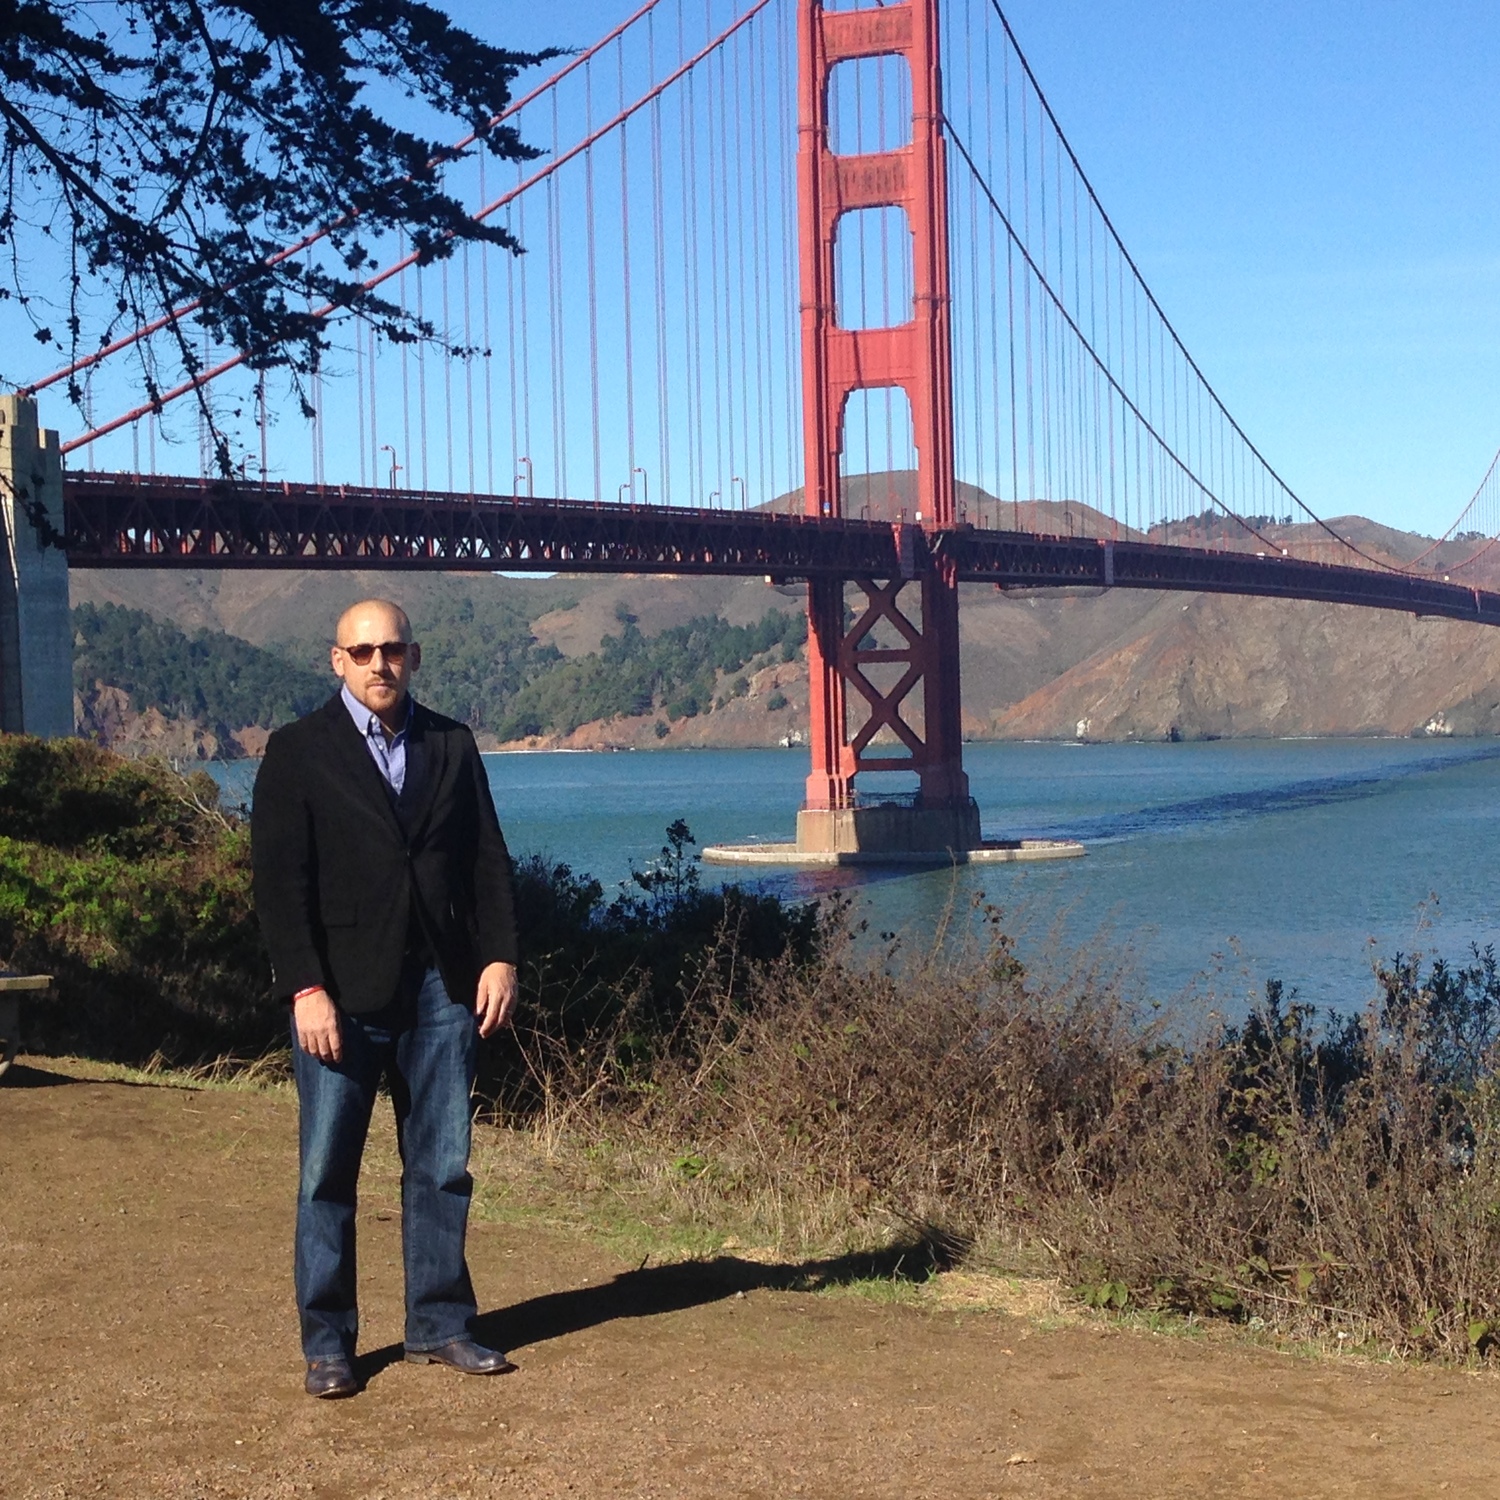 Kevin Hines Jumped Off the Golden Gate Bridge, and Survived